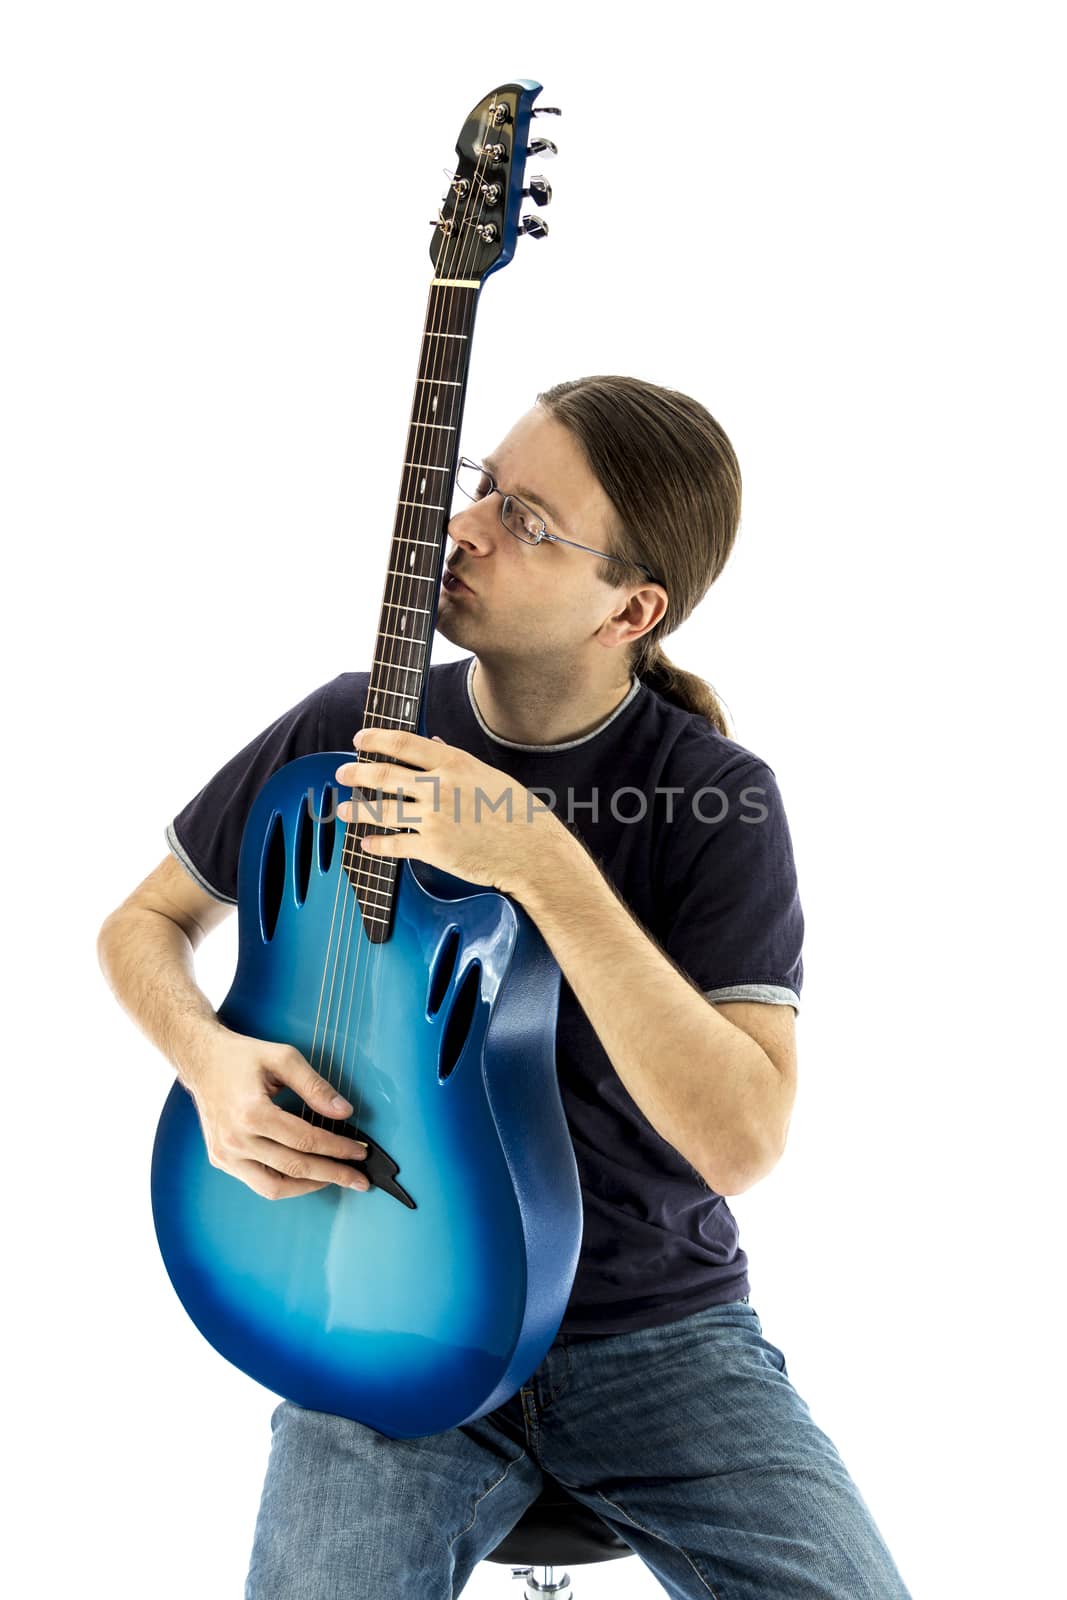 Guitarist kissing his e-guitar (Series with the same model avail by snowwhite